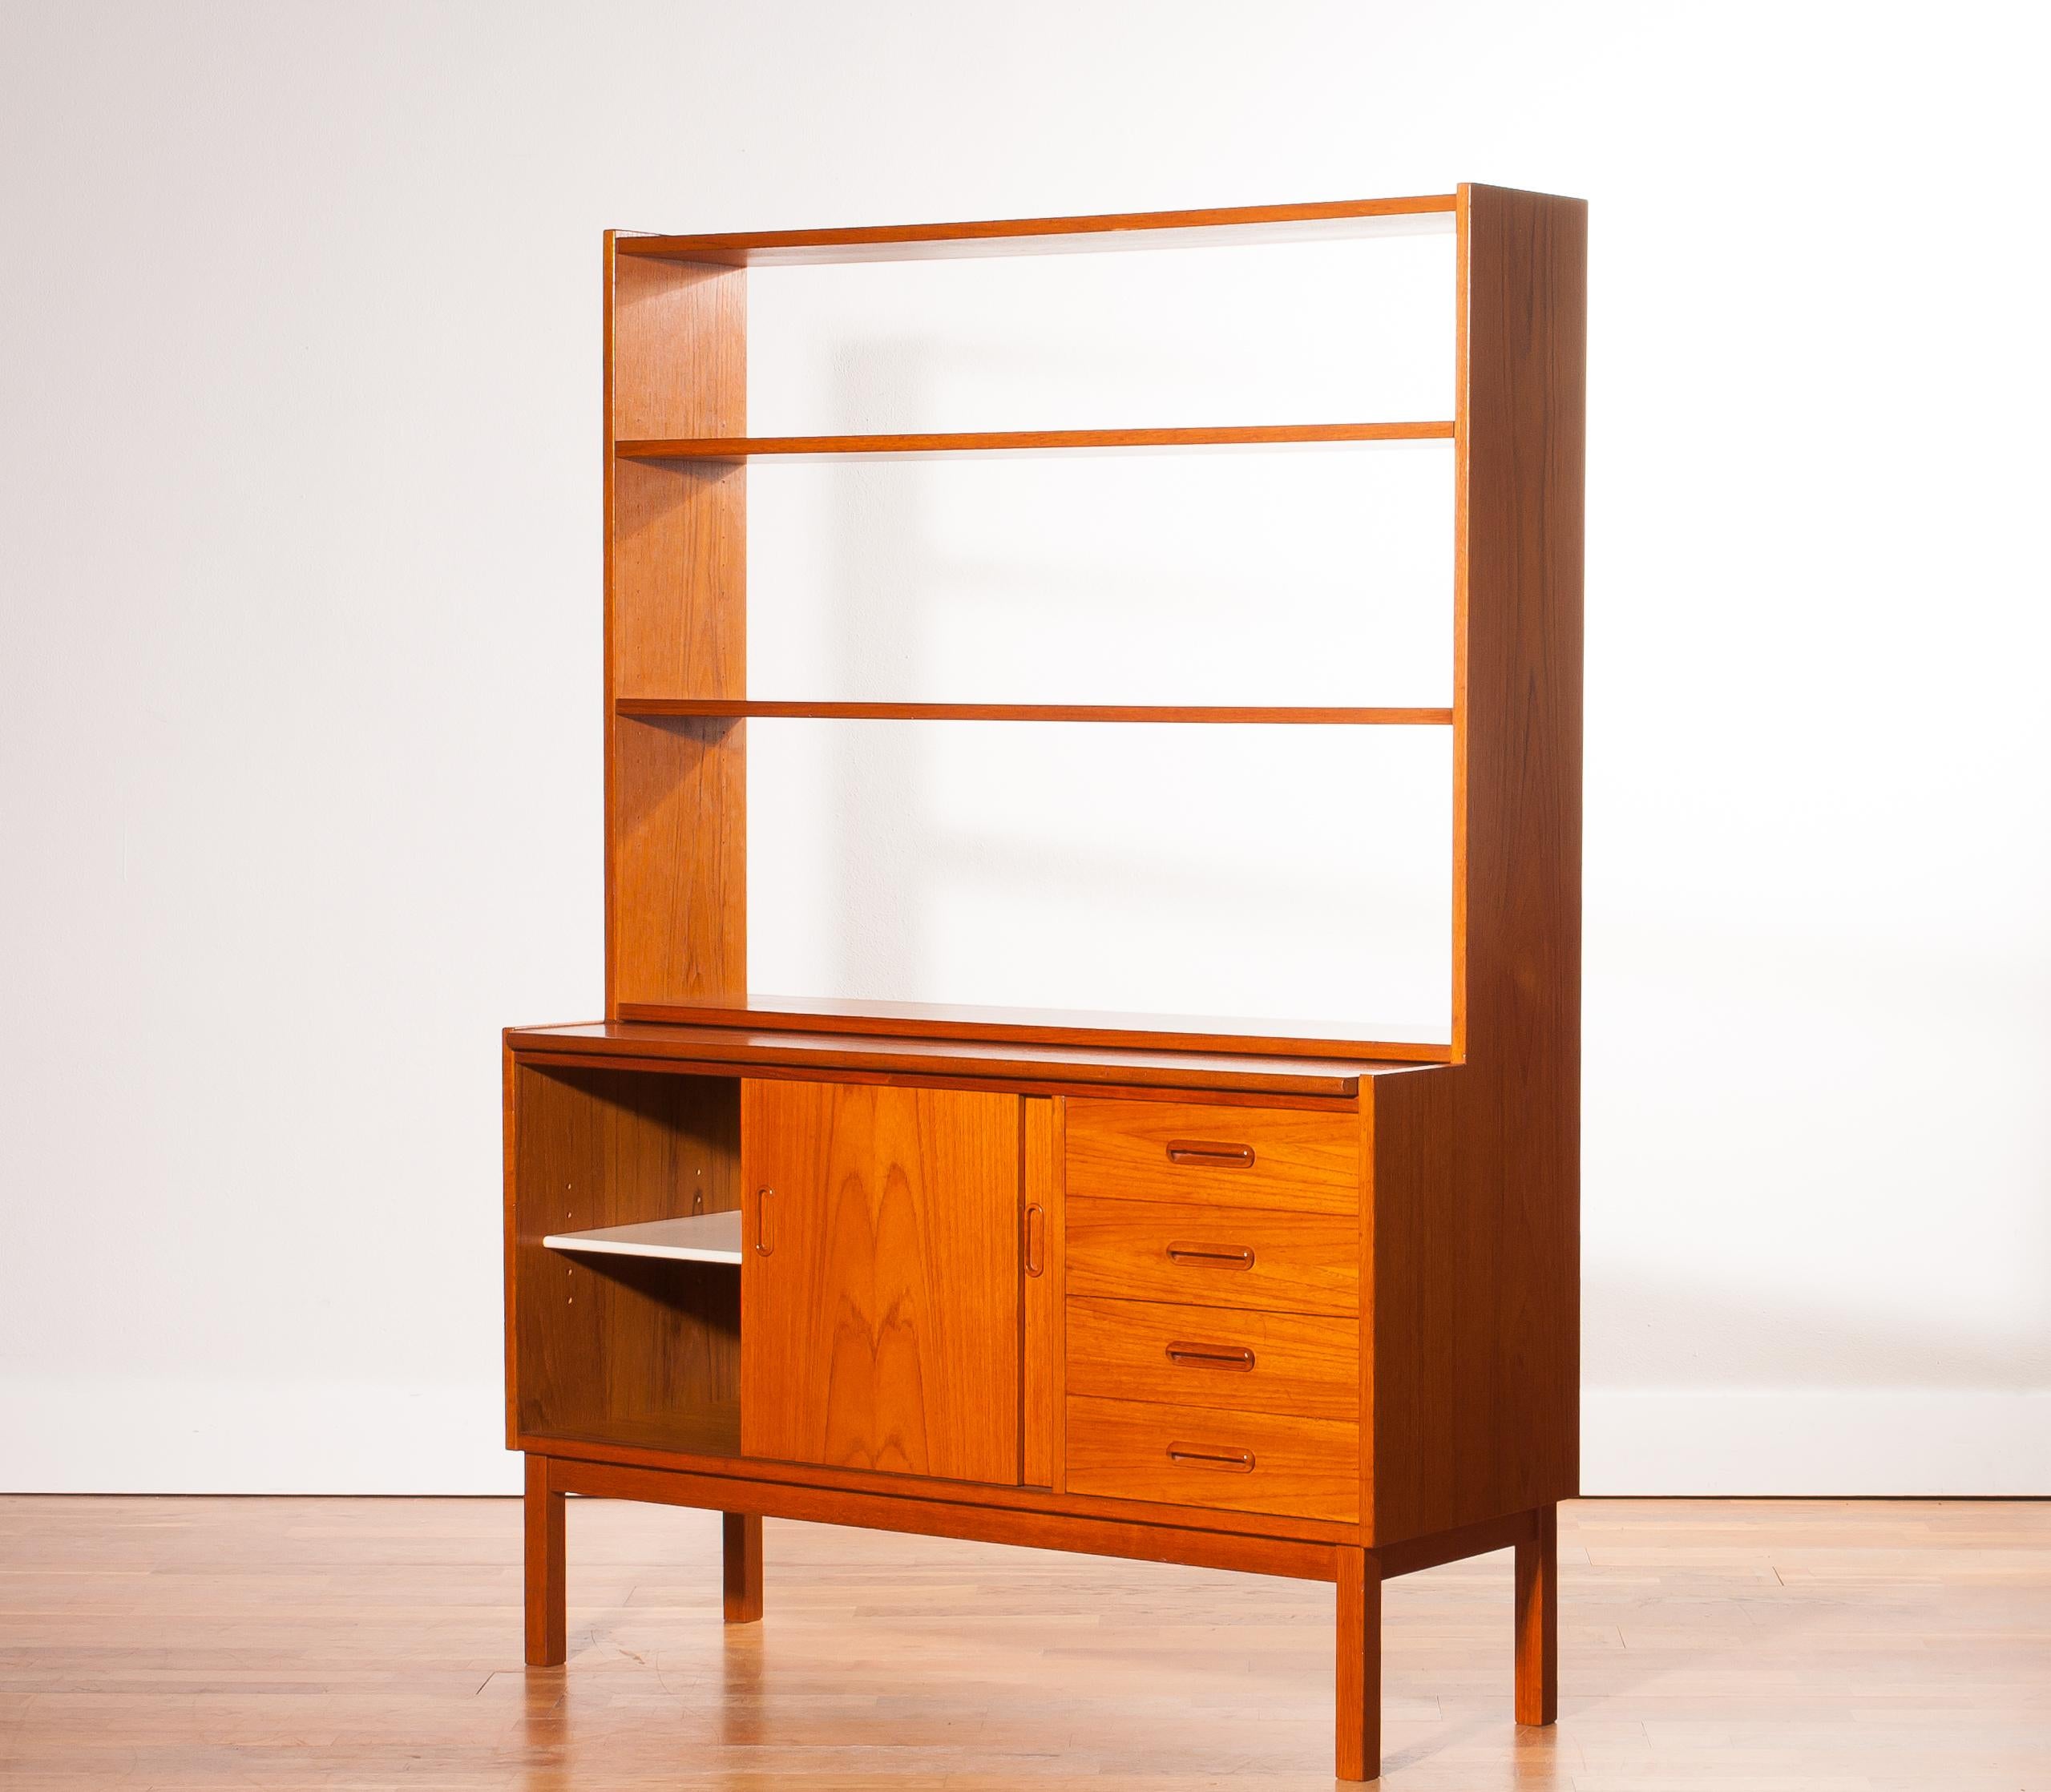 1960s, Teak Bookcase with Slid Able Writing or Working Space from Sweden 3